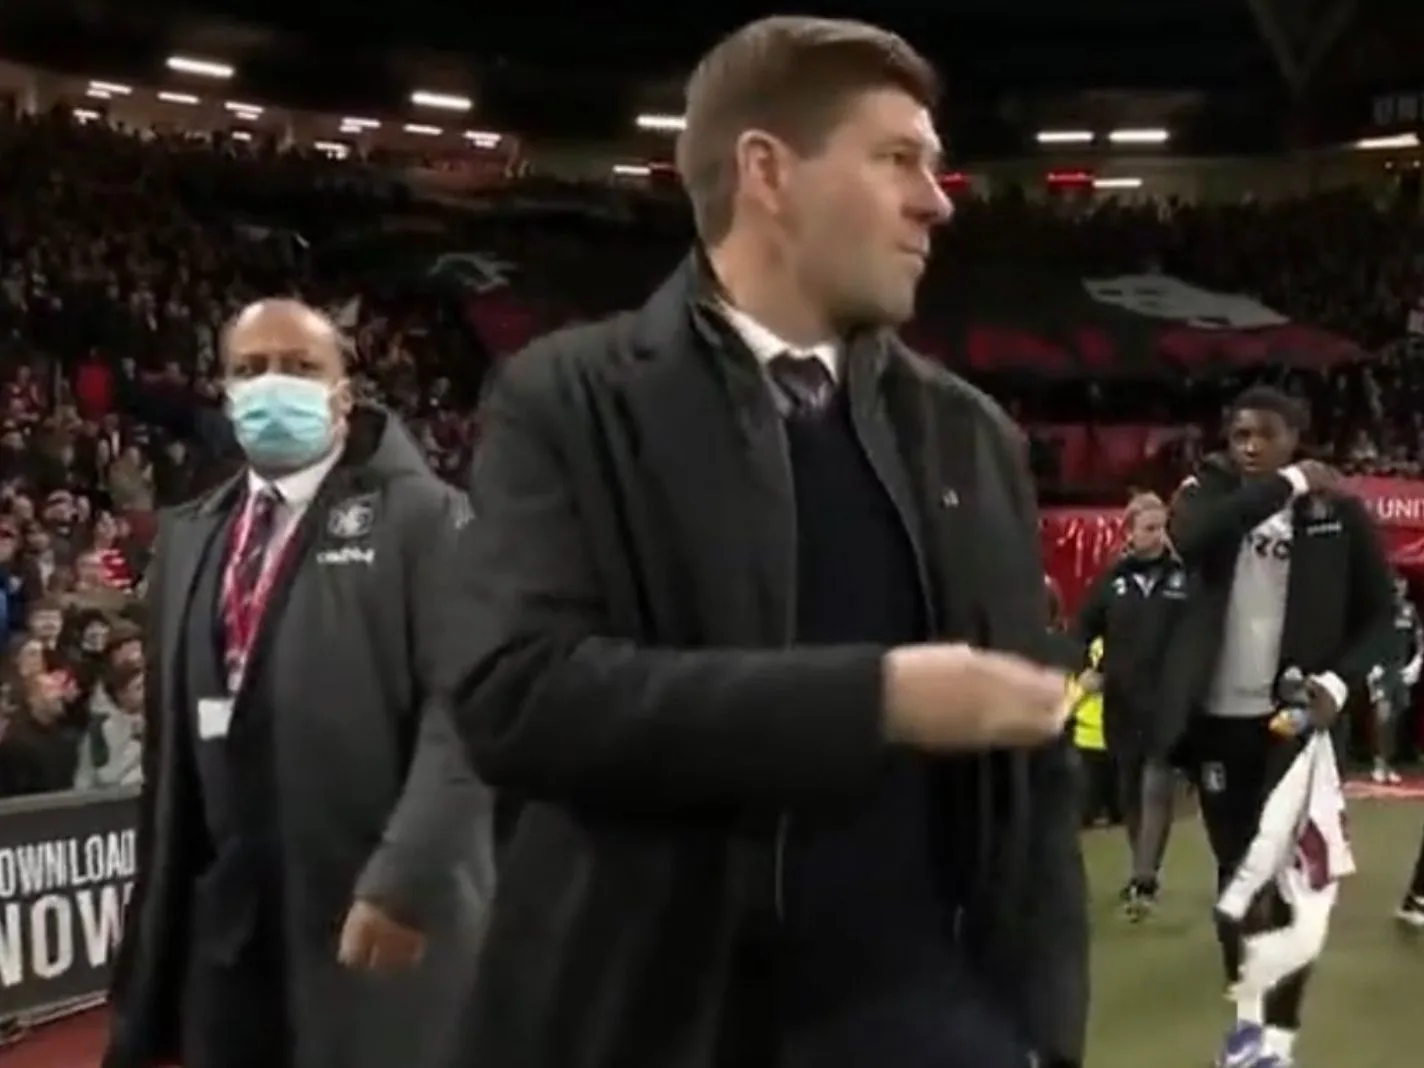 Steven Gerrard turned to face the Man United fans who were booing him